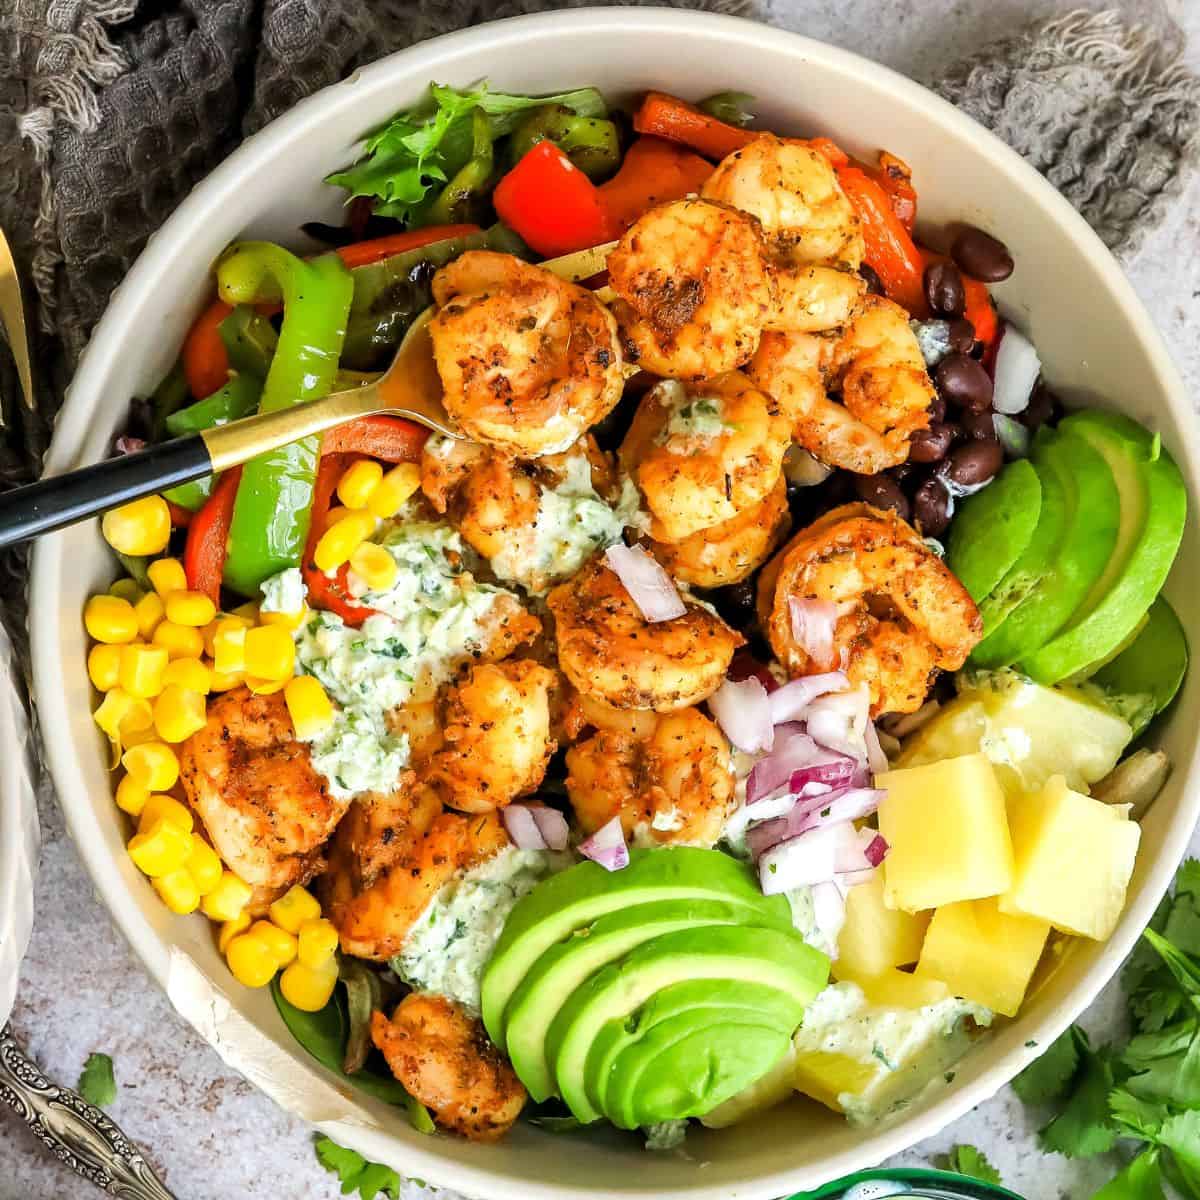 Grey bowls with salad and blackened shrimp. Gold fork to the side.